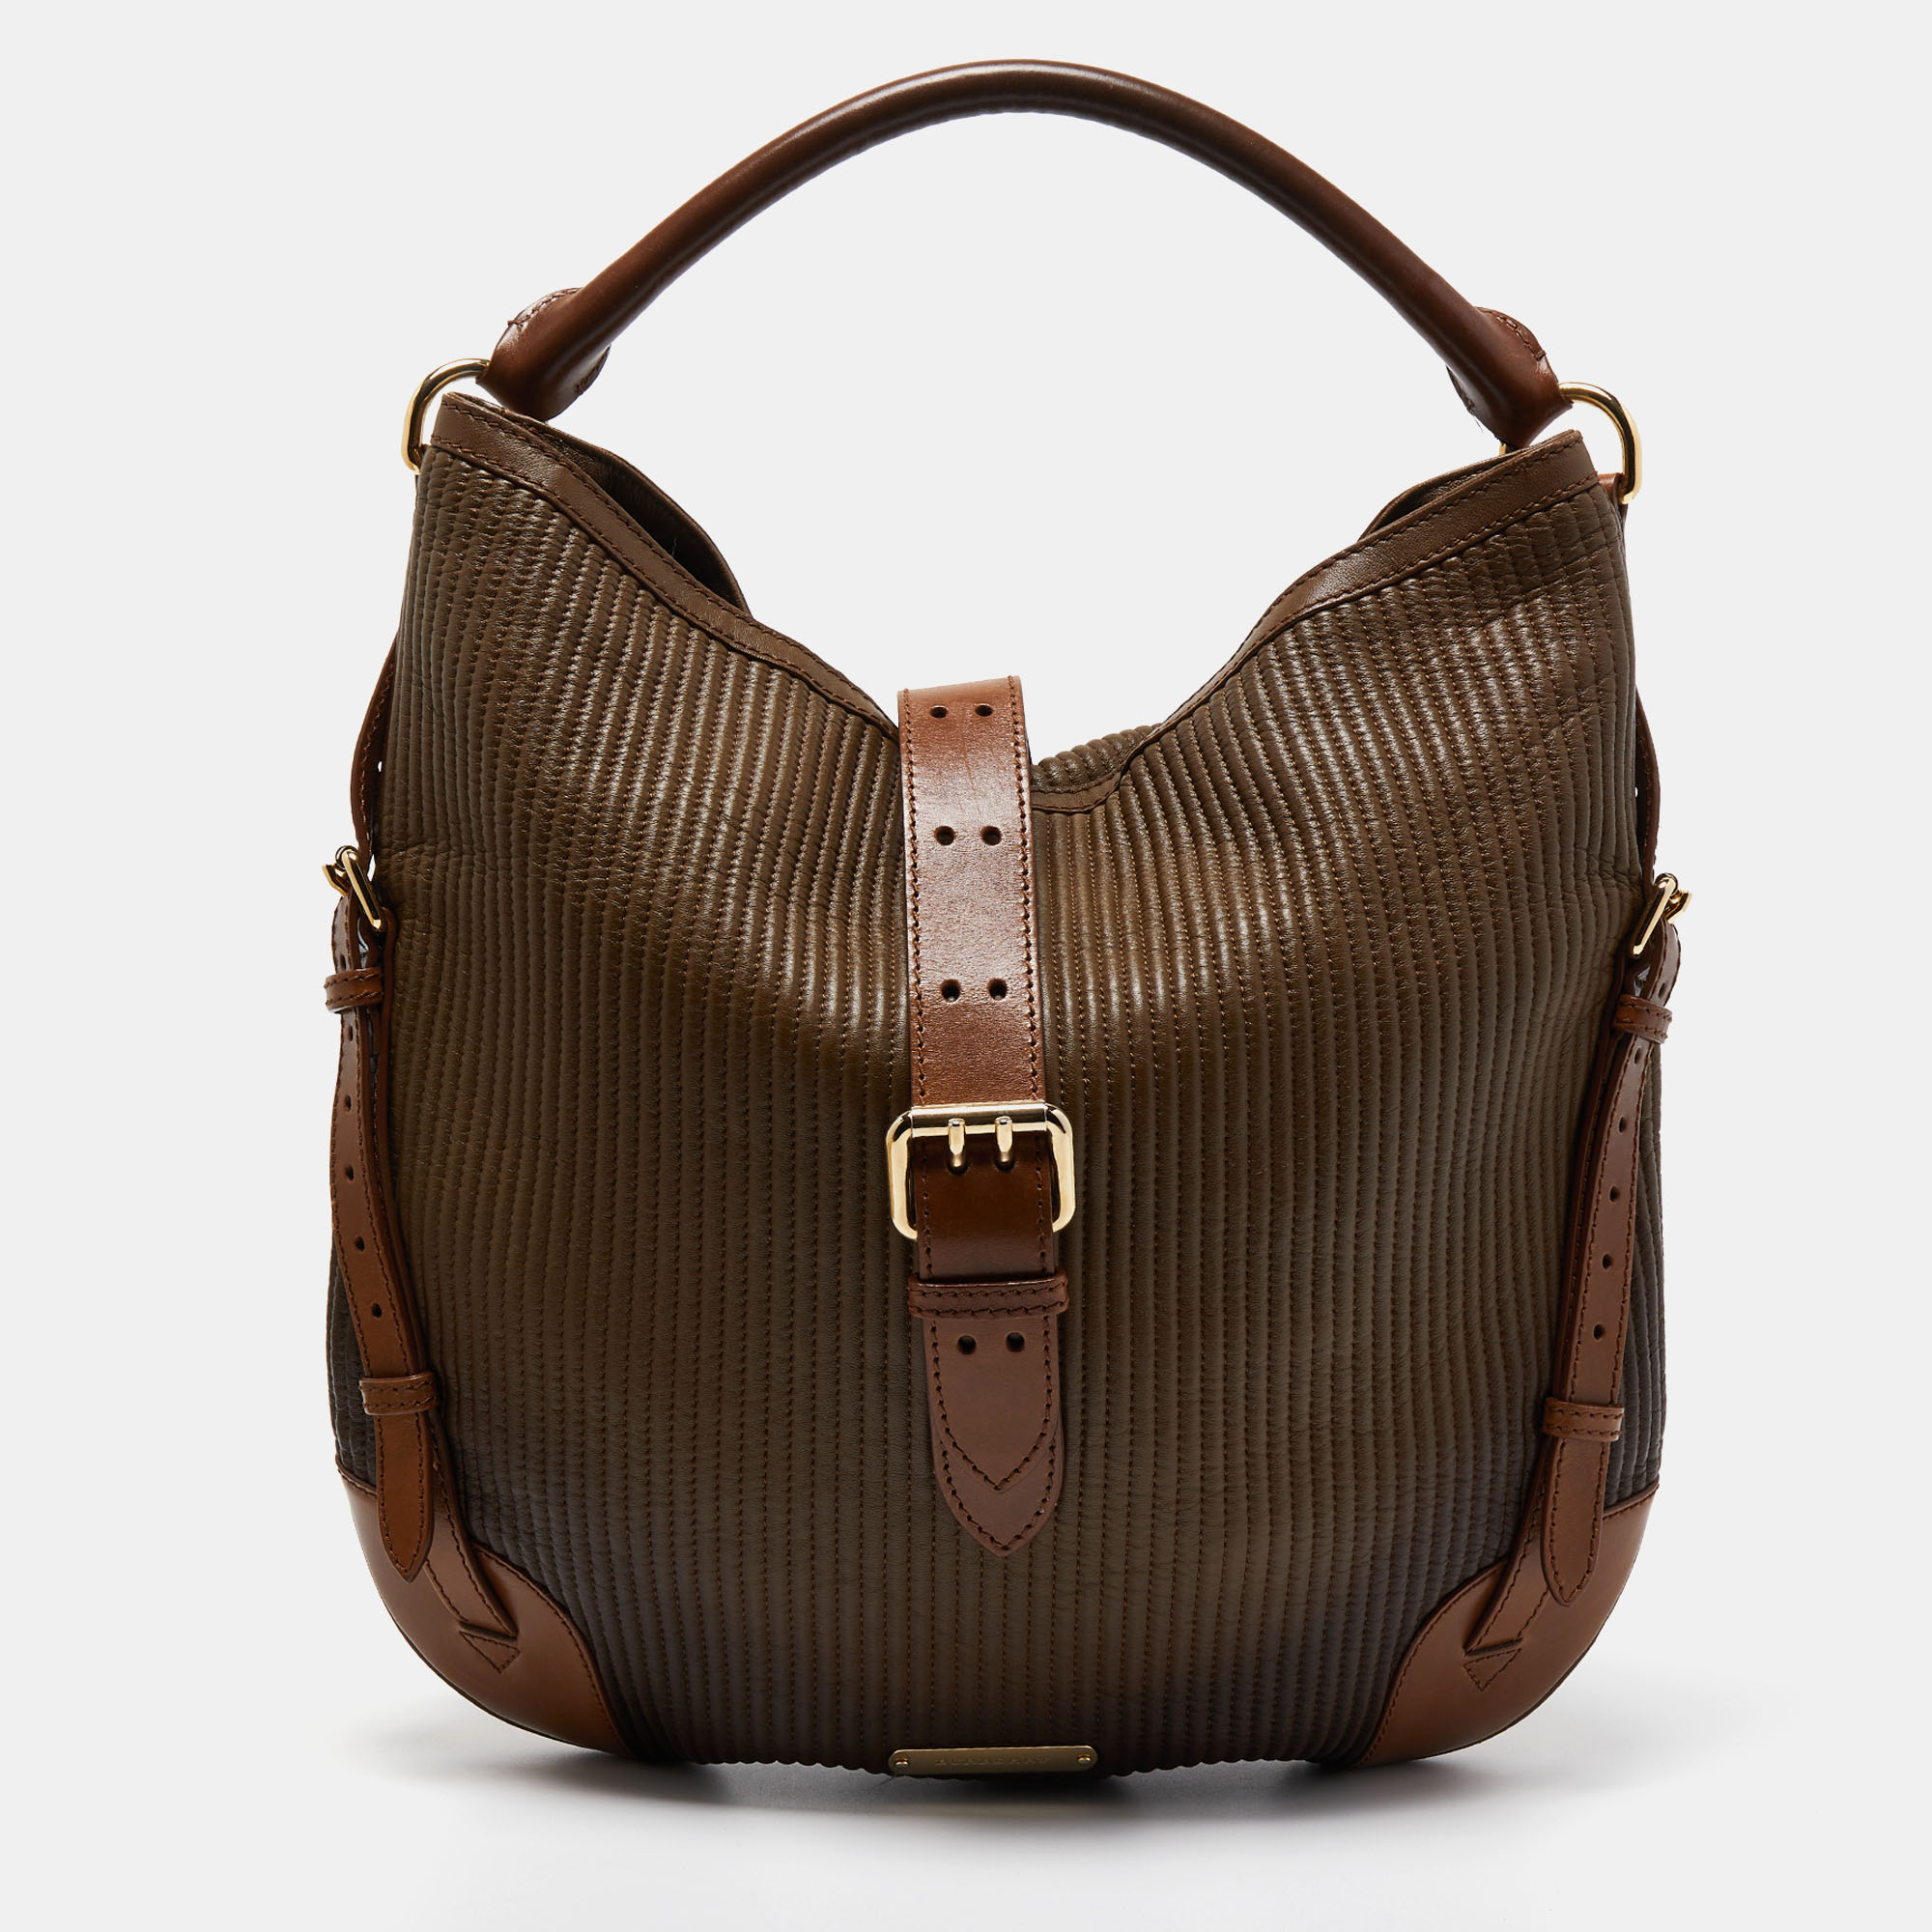 Burberry Brown Quilted Leather Dunloe Hobo